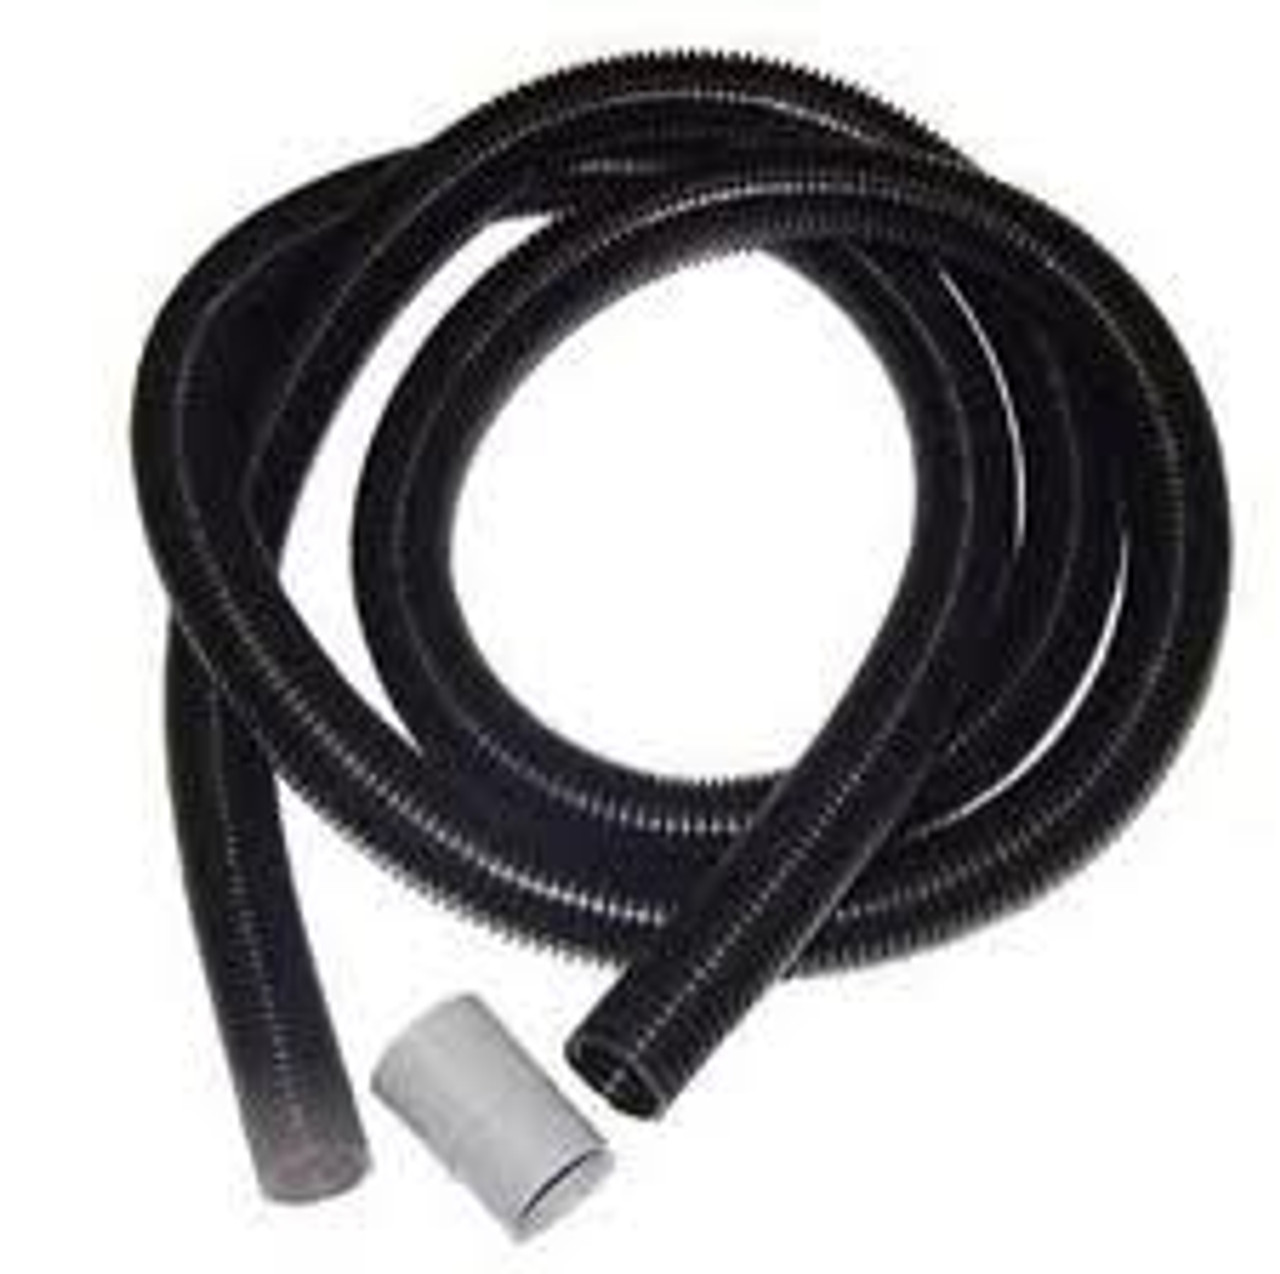 Vac Hose Without Wire - Atlanta Barber and Beauty Supply